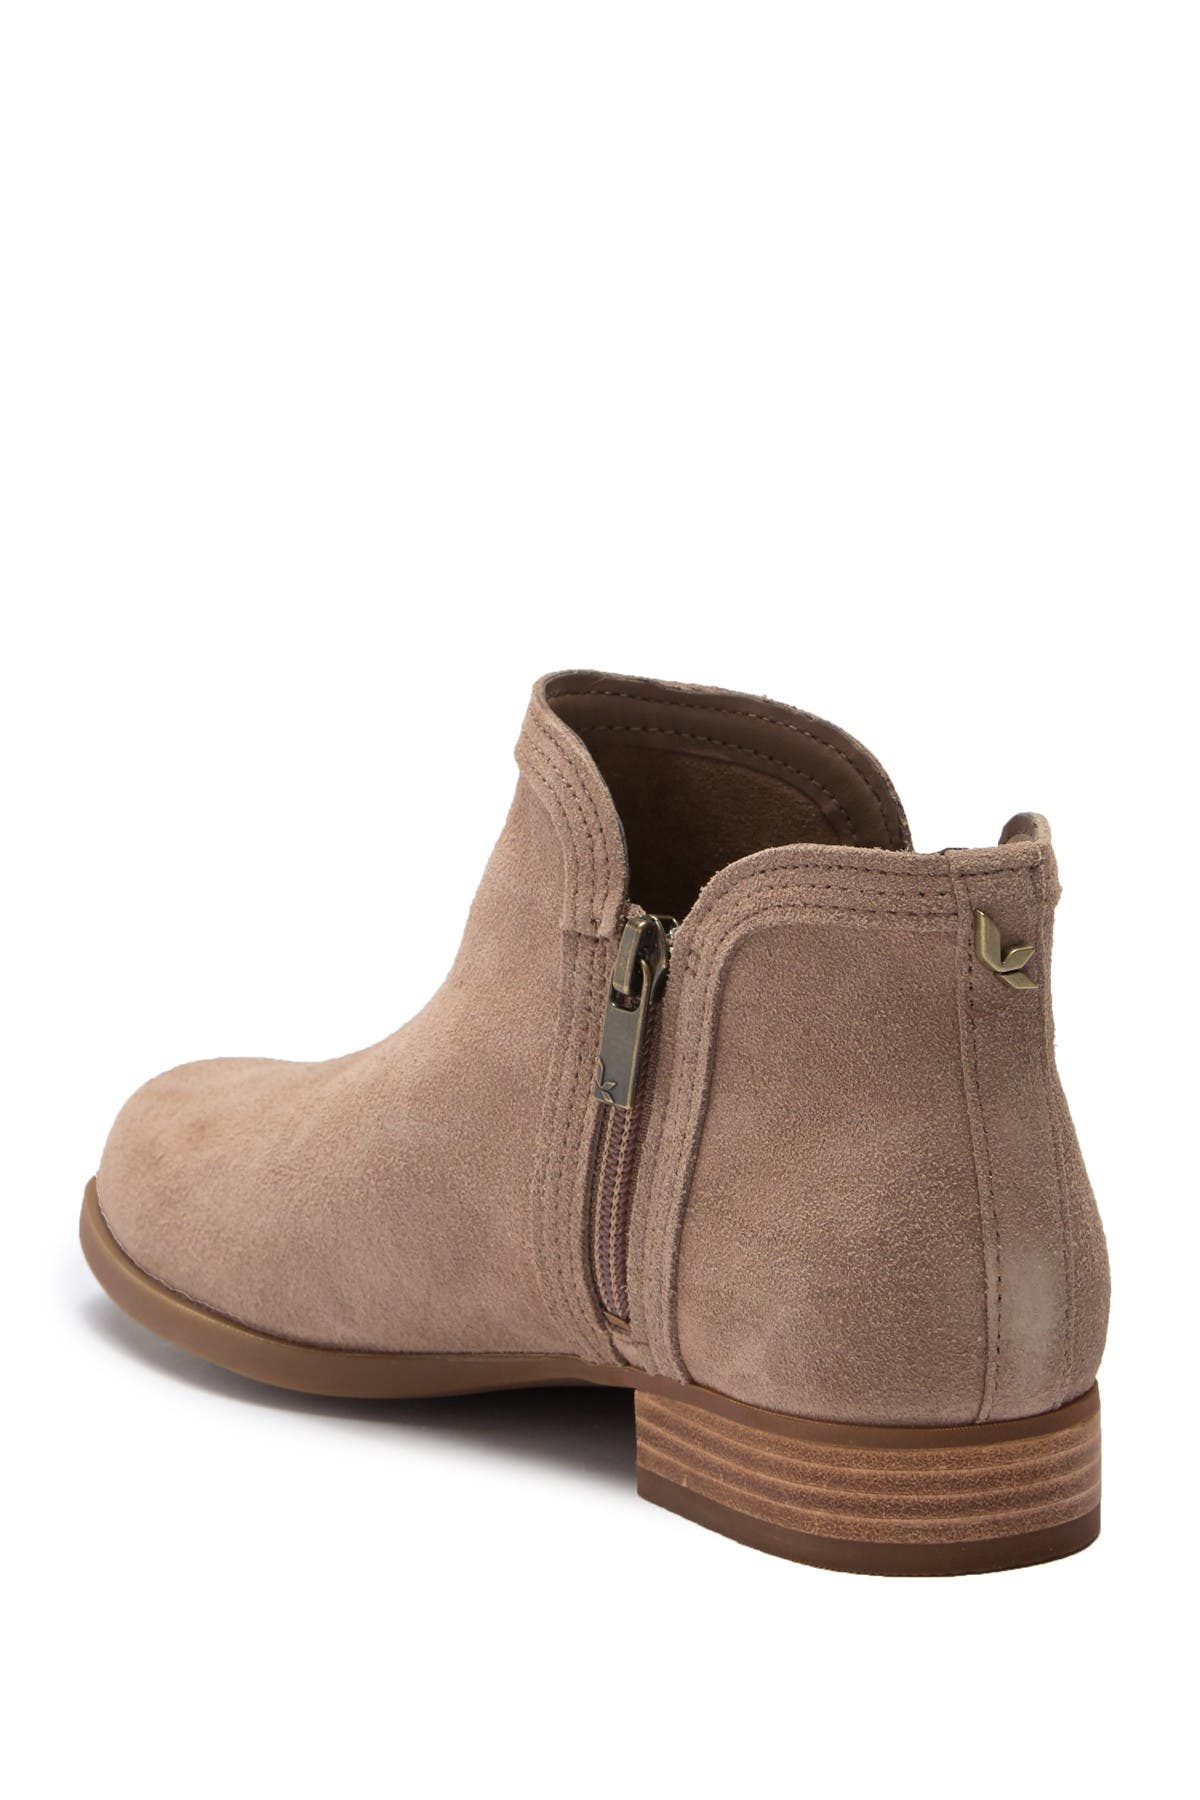 UGG | Cheyanna Suede Ankle Bootie 